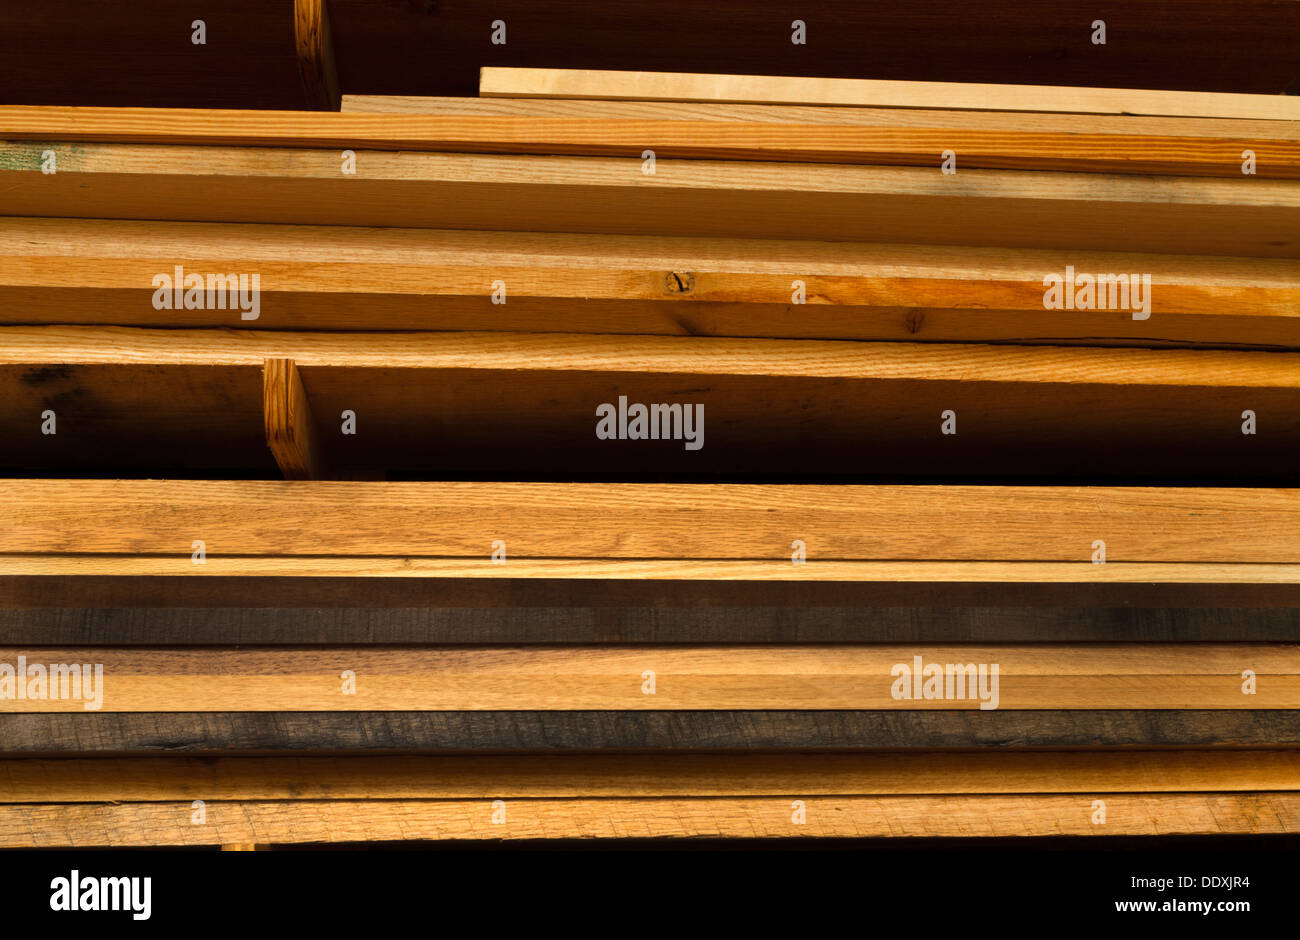 Various boards of lumber stacked on shelves in a woodworking workshop. Most of the lumber is oak wood in various stages of aging Stock Photo